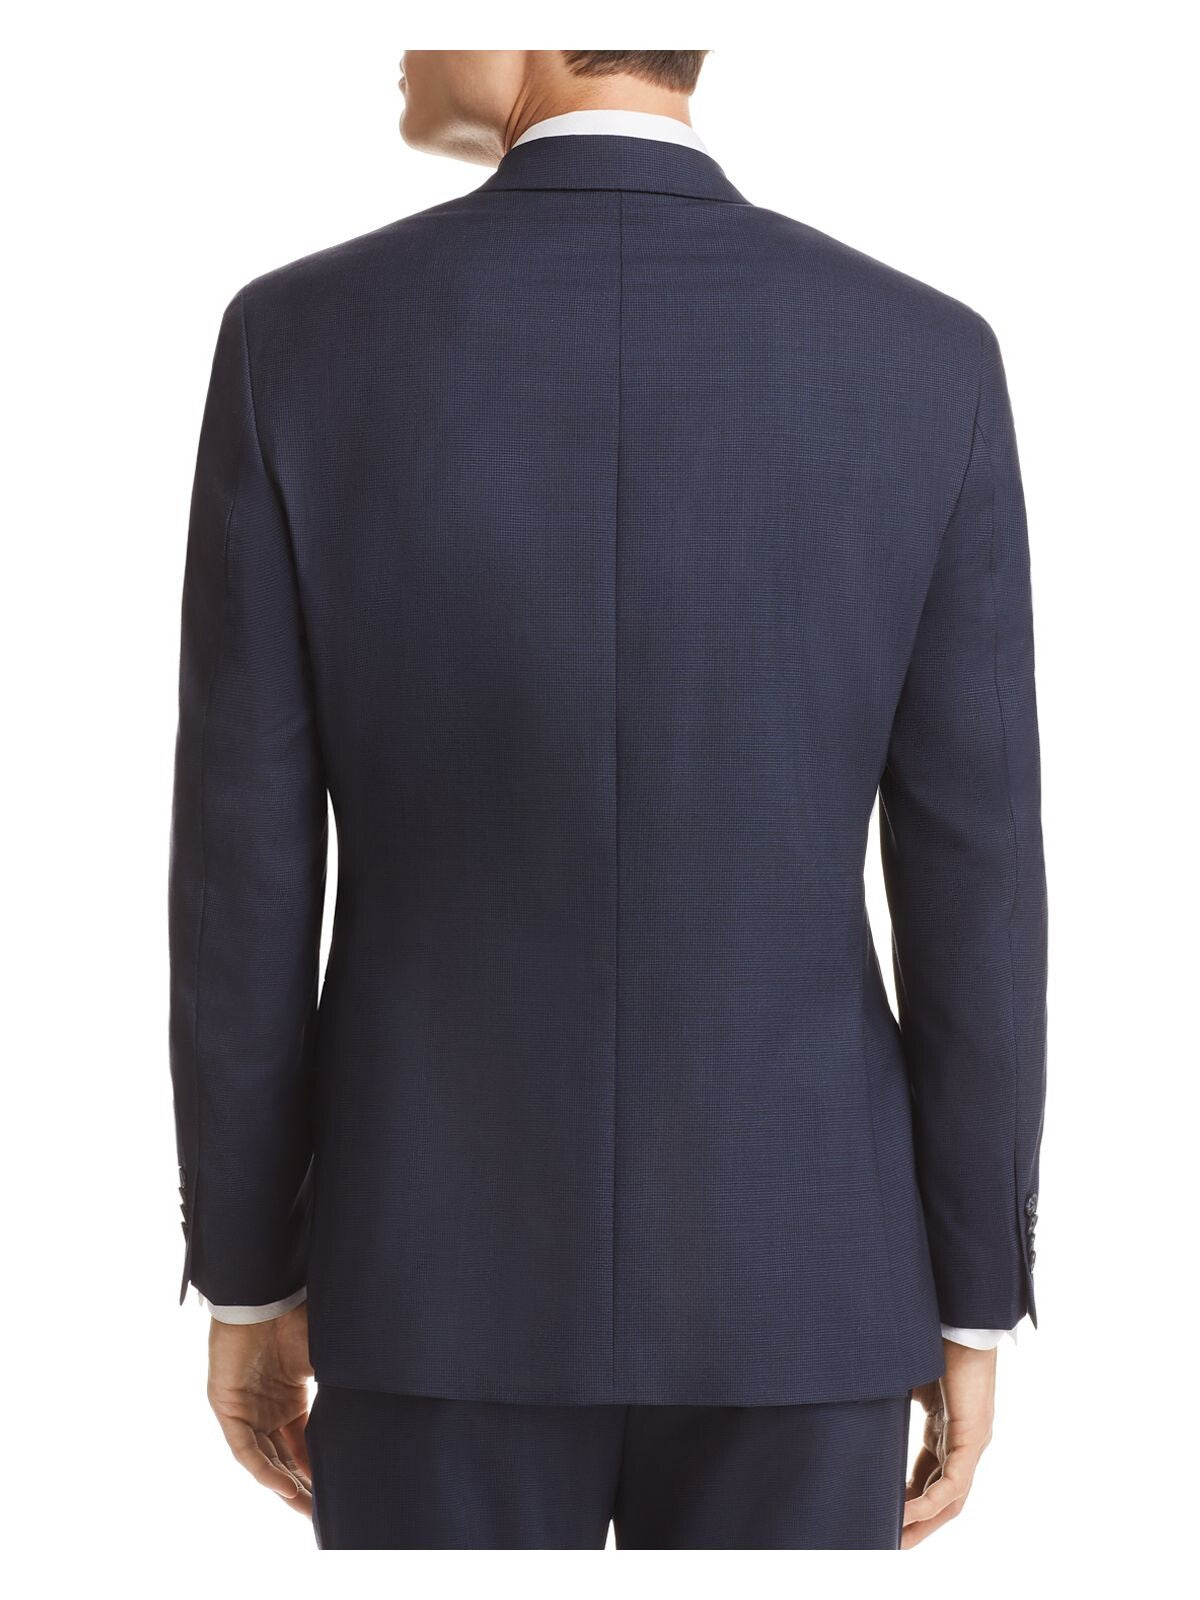 MICHAEL KORS Mens Navy Single Breasted, Stretch, Classic Fit Wool Blend Suit Separate Blazer Jacket 44L